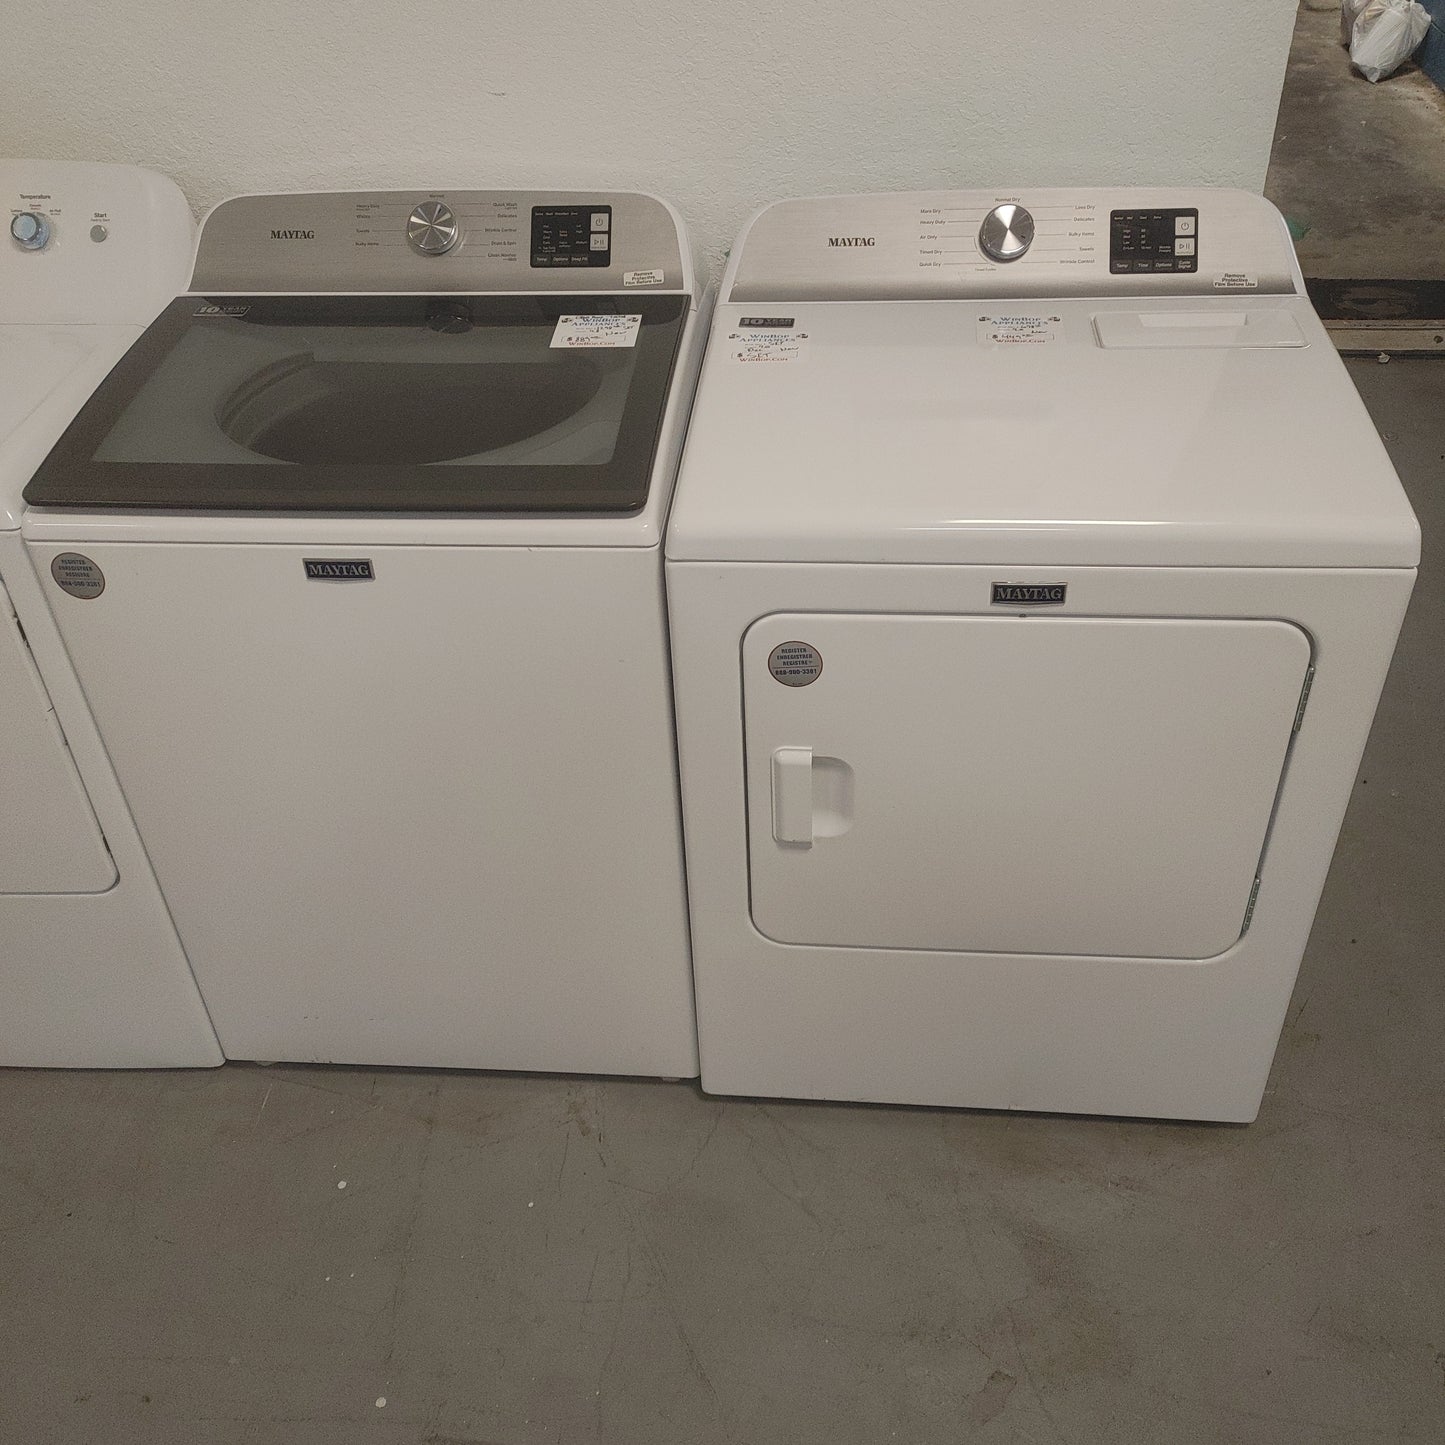 New Maytag 4.8 Cubic ft Top Load Washer and 7 Cubic ft Electric Dryer Set